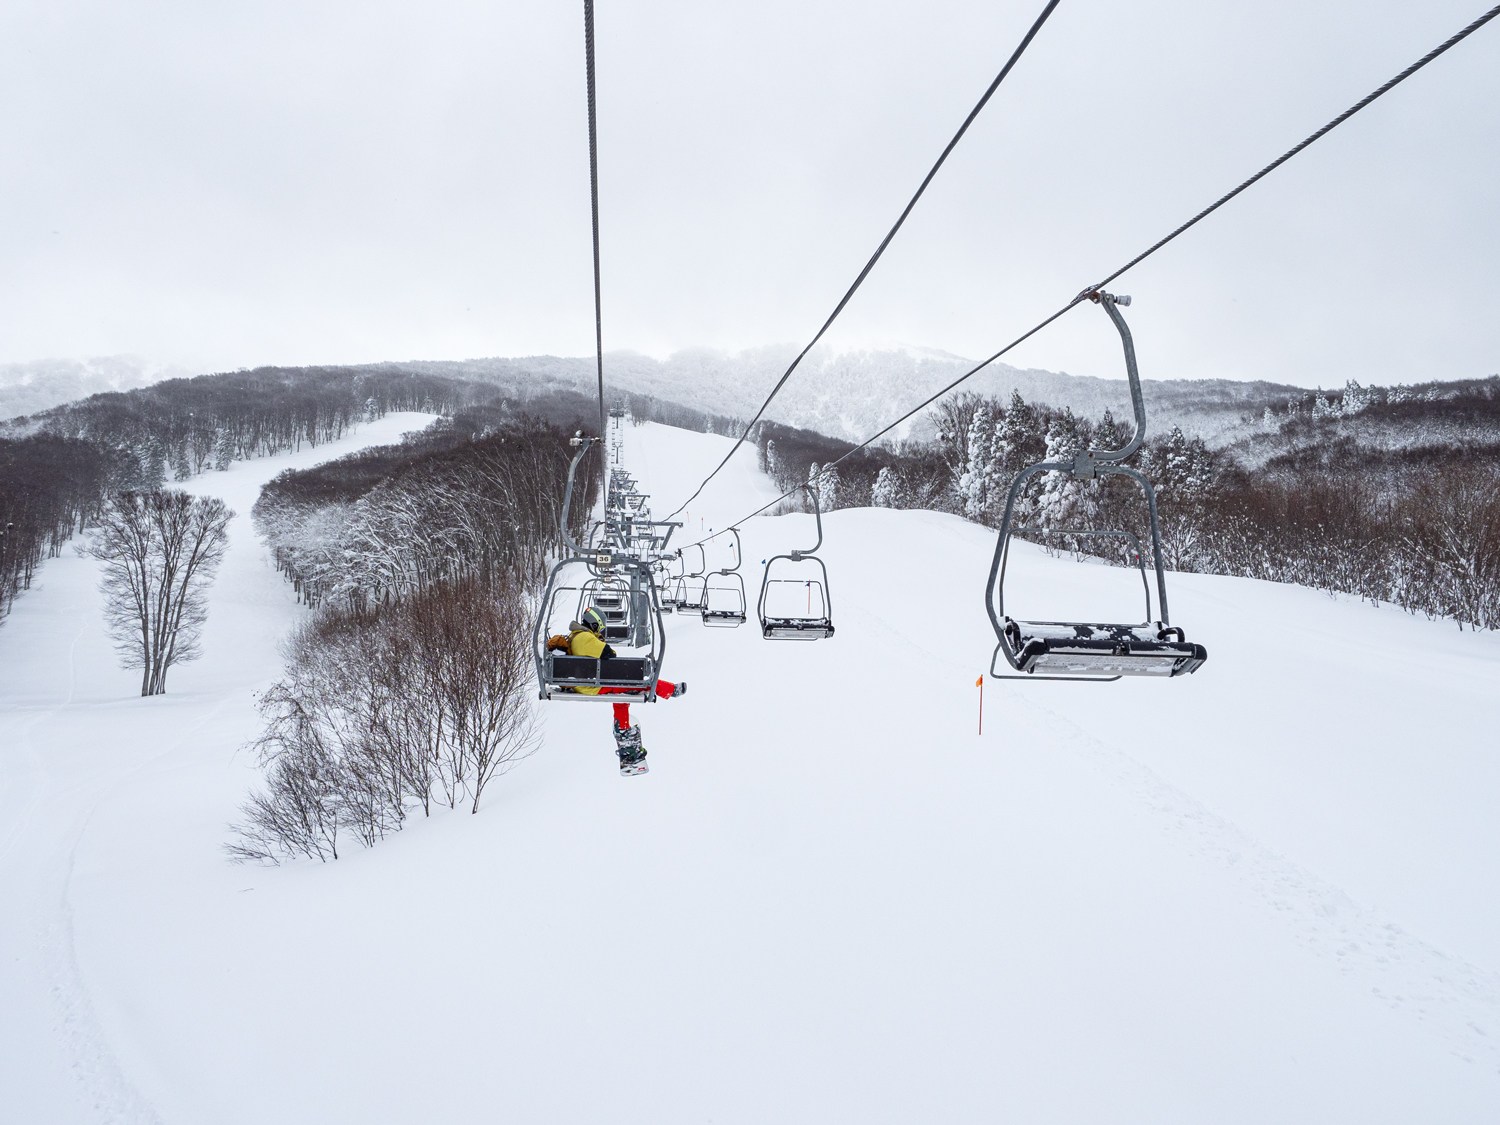 Empty chairlift at Aomori Spring